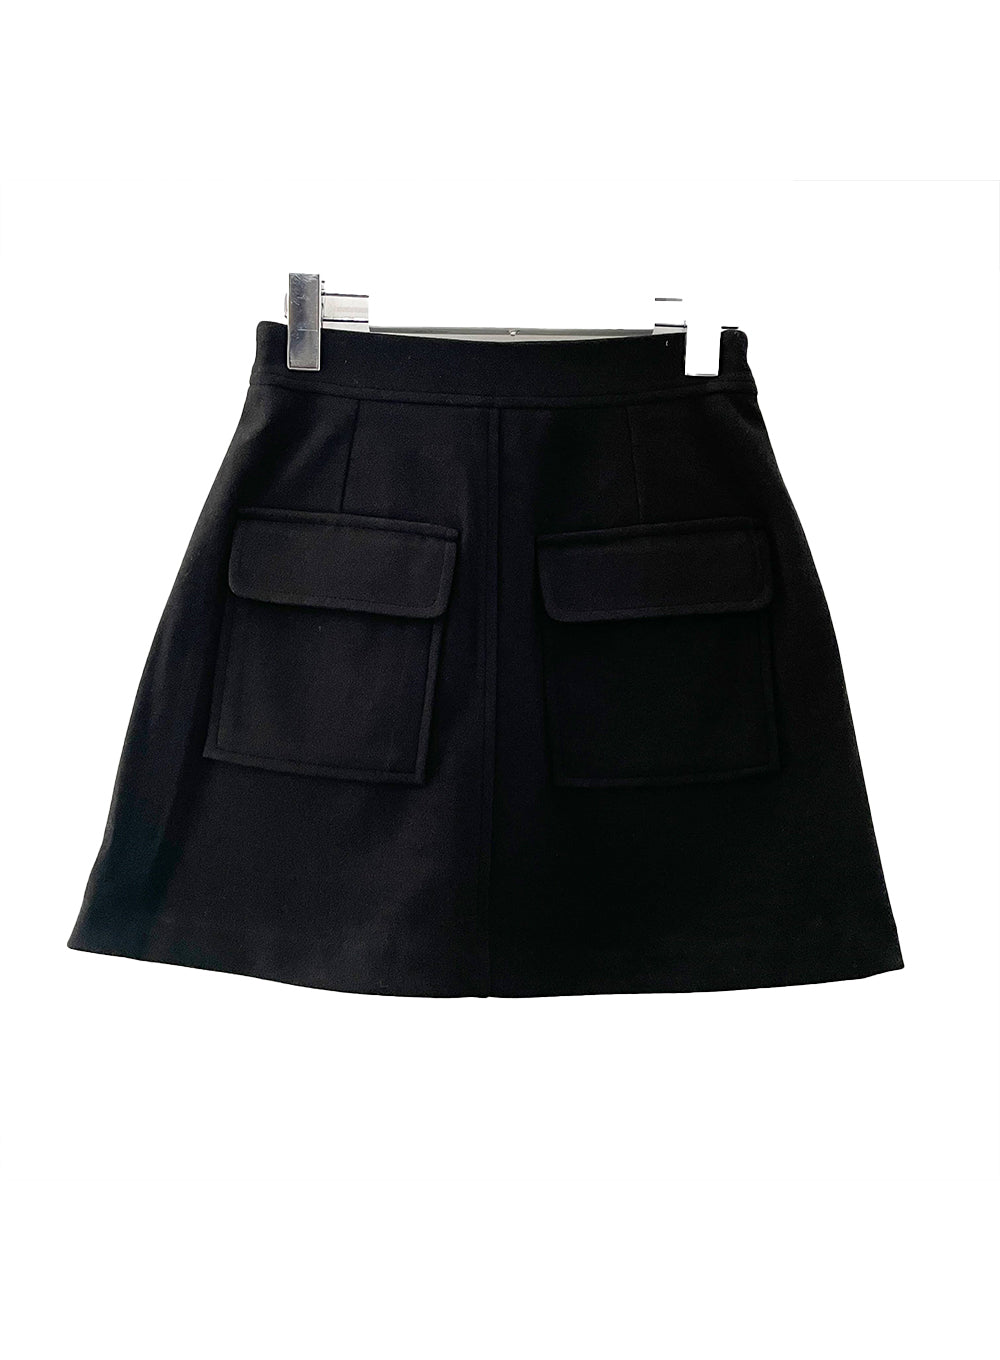 Double Pocket Thick Skirt